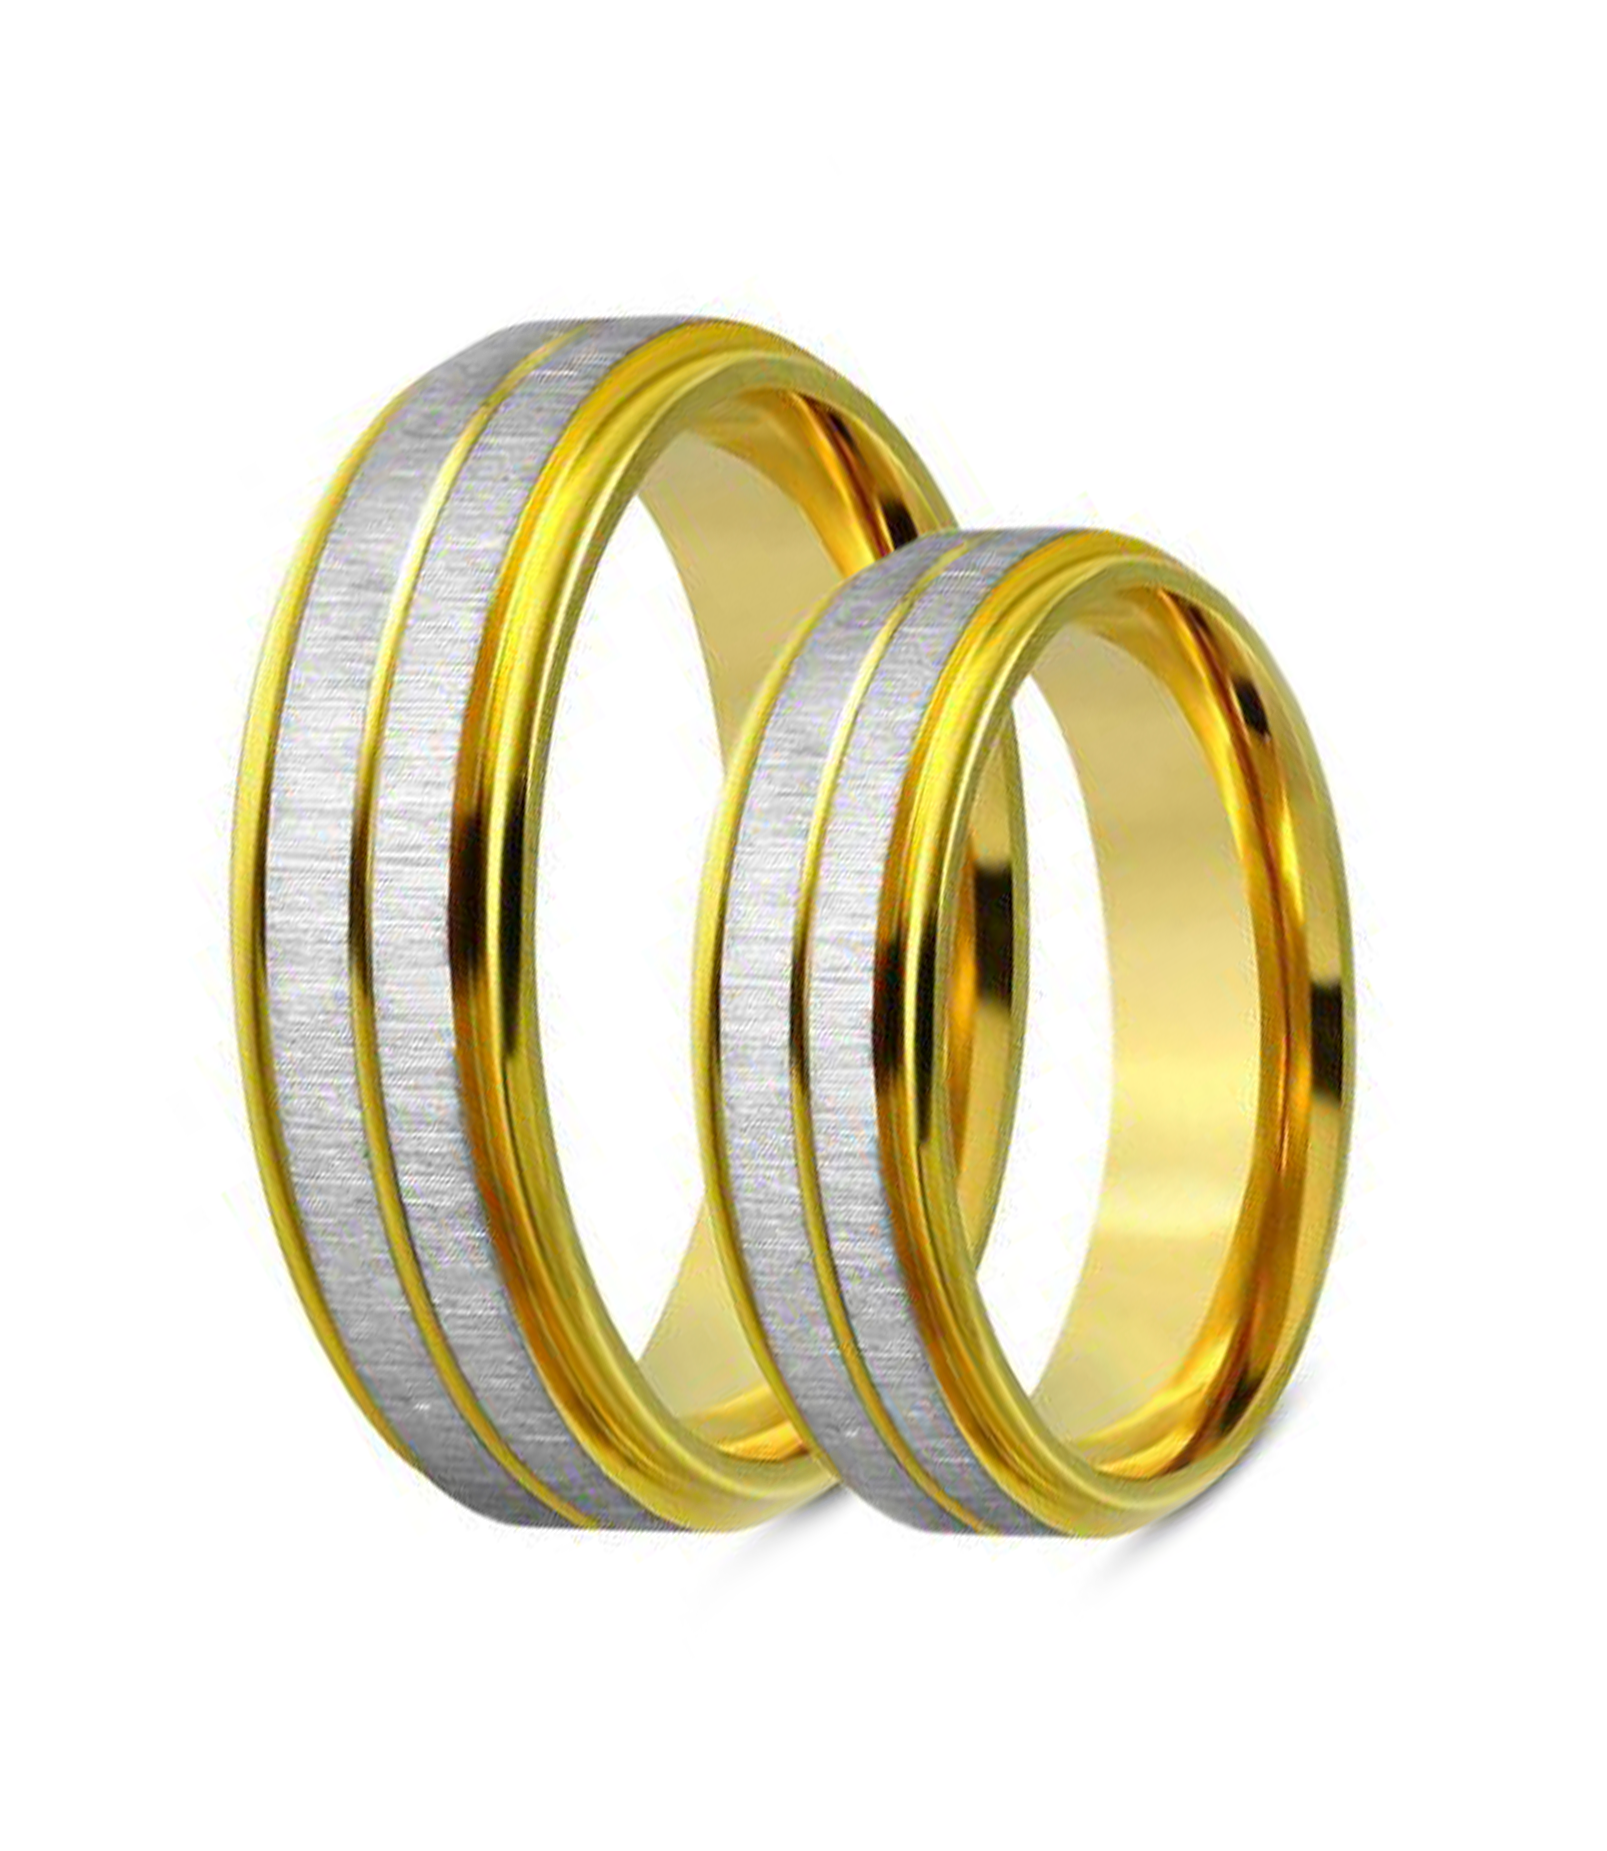 Buy Gold & Silver Stainless Steel Polished Dual|Tone Wedding Band Ring  Online | INOX Jewelry India - Inox Jewelry India